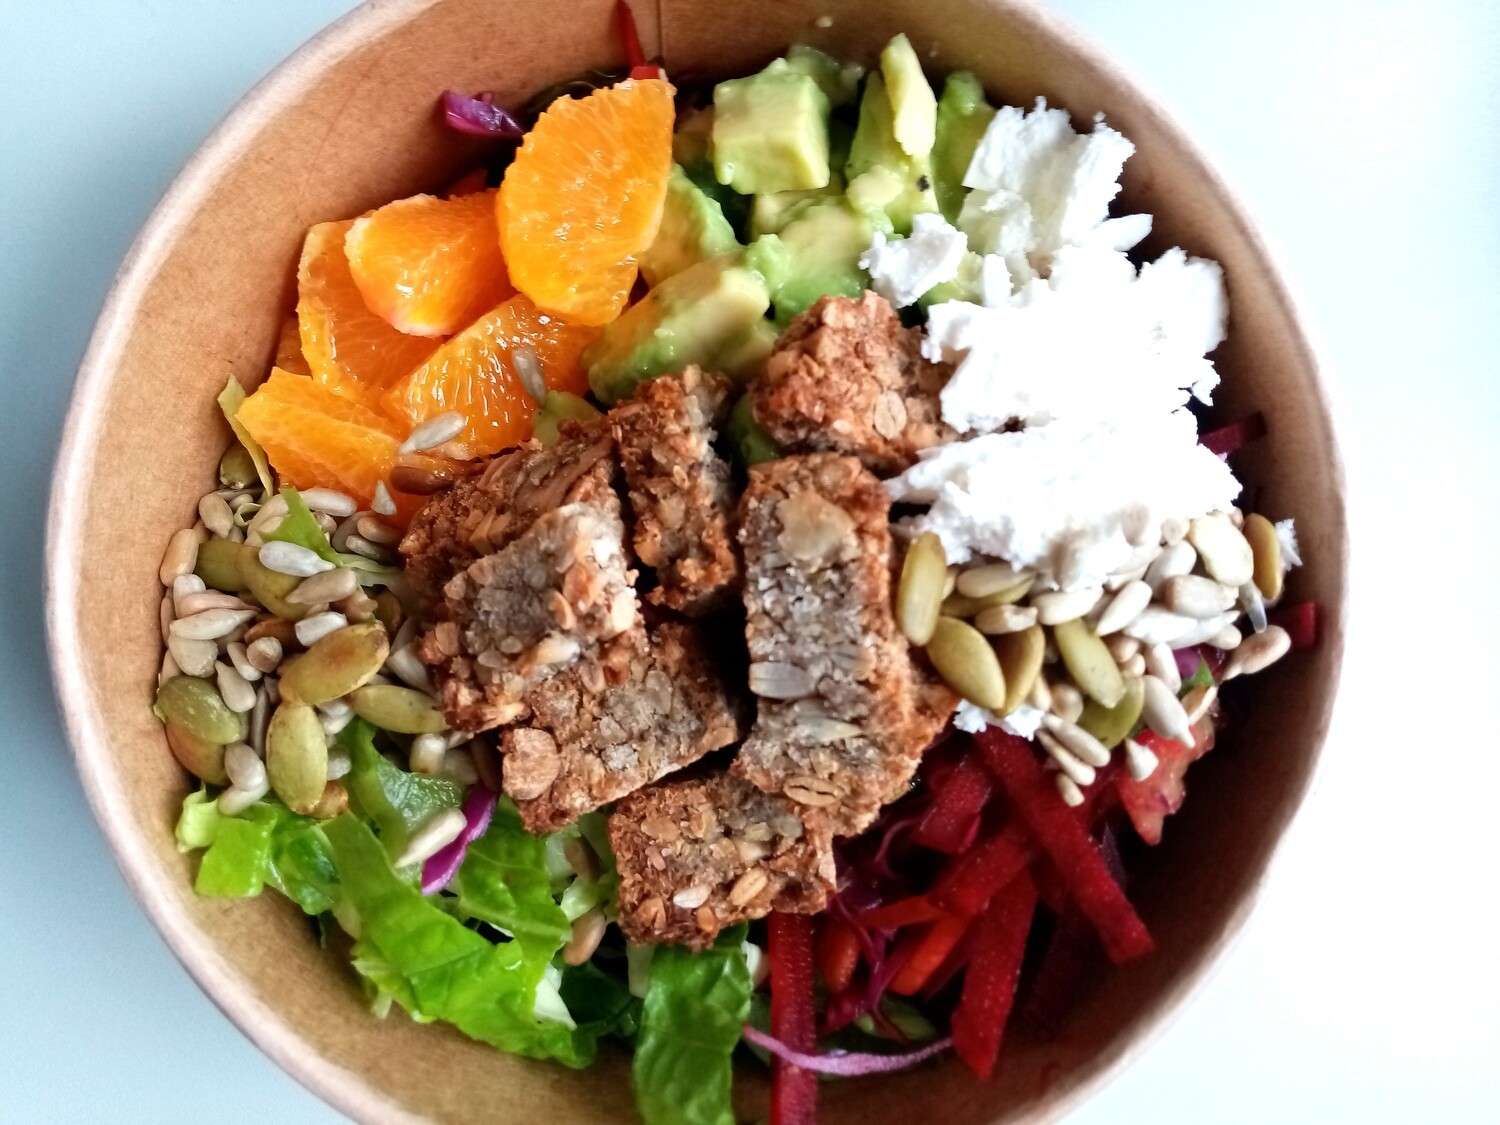 WELLNESS BOWL. toasted buckwheat and seed bread croutons, cos lettuce, grated carrot, beetroot, celery, orange and avocado, toasted seeds. Your choice vinaigrette and extras.